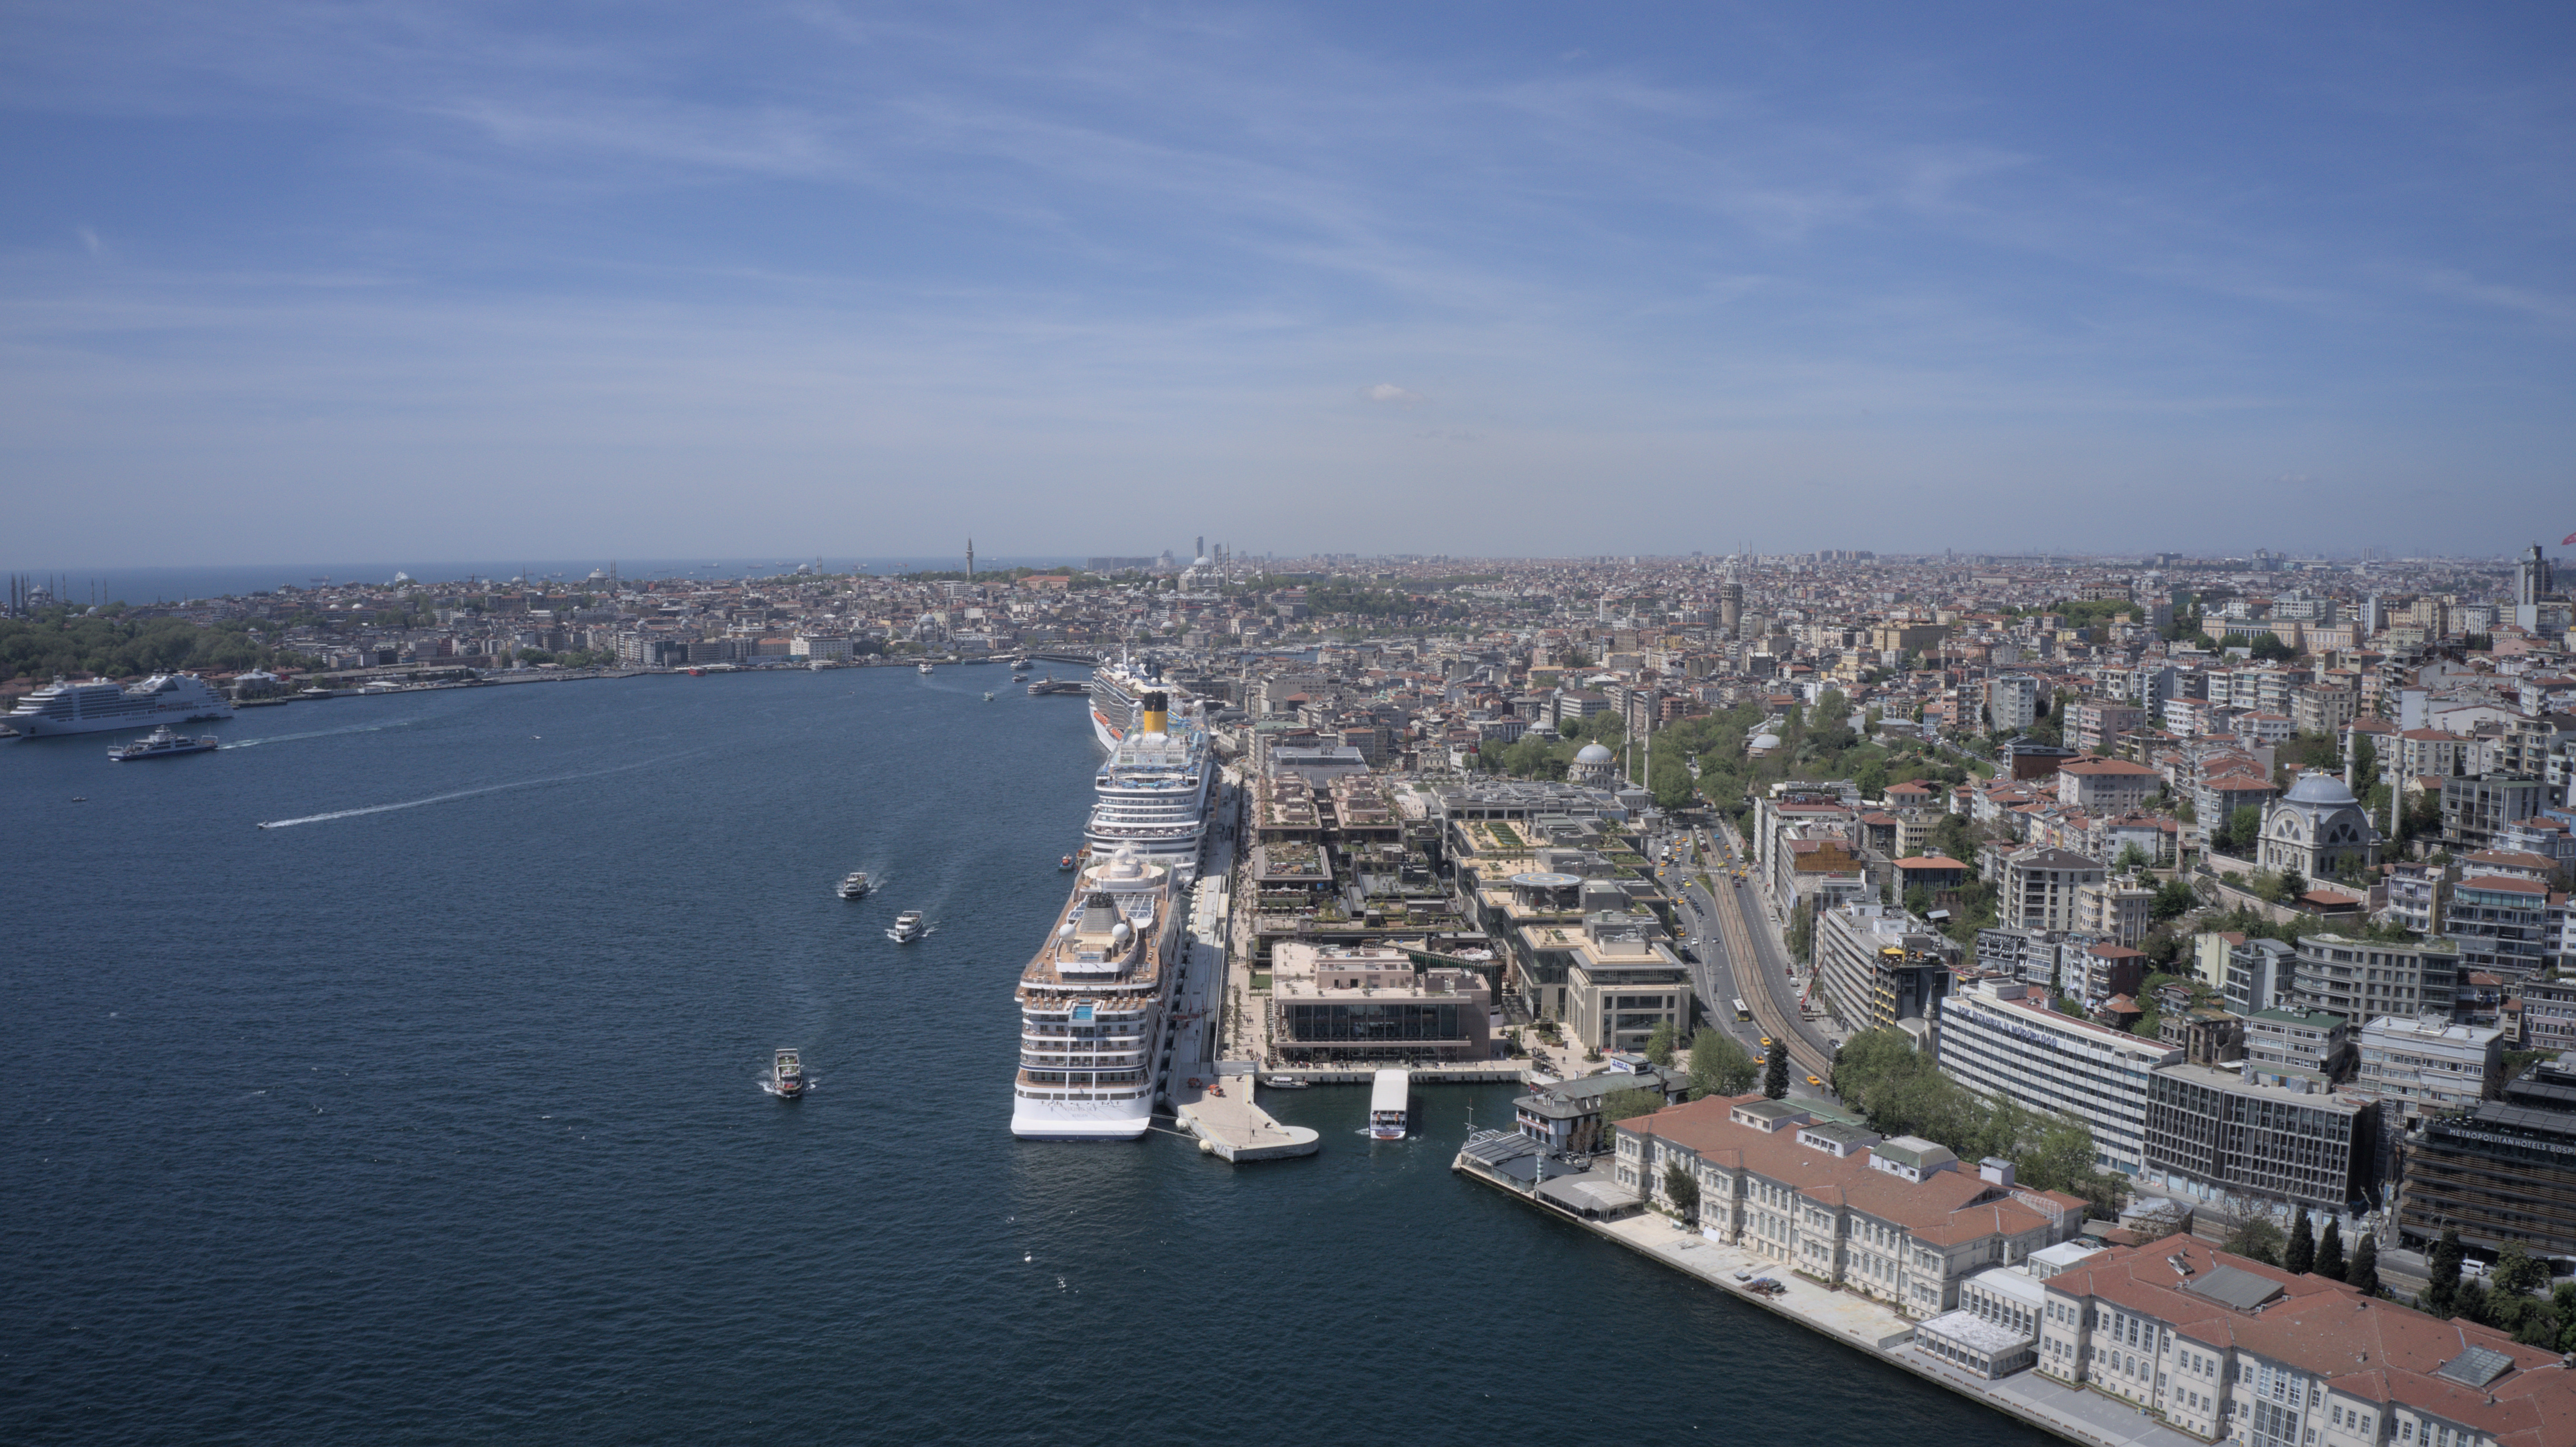 “Best New Development Project” at the MAPIC Awards: Galataport Istanbul